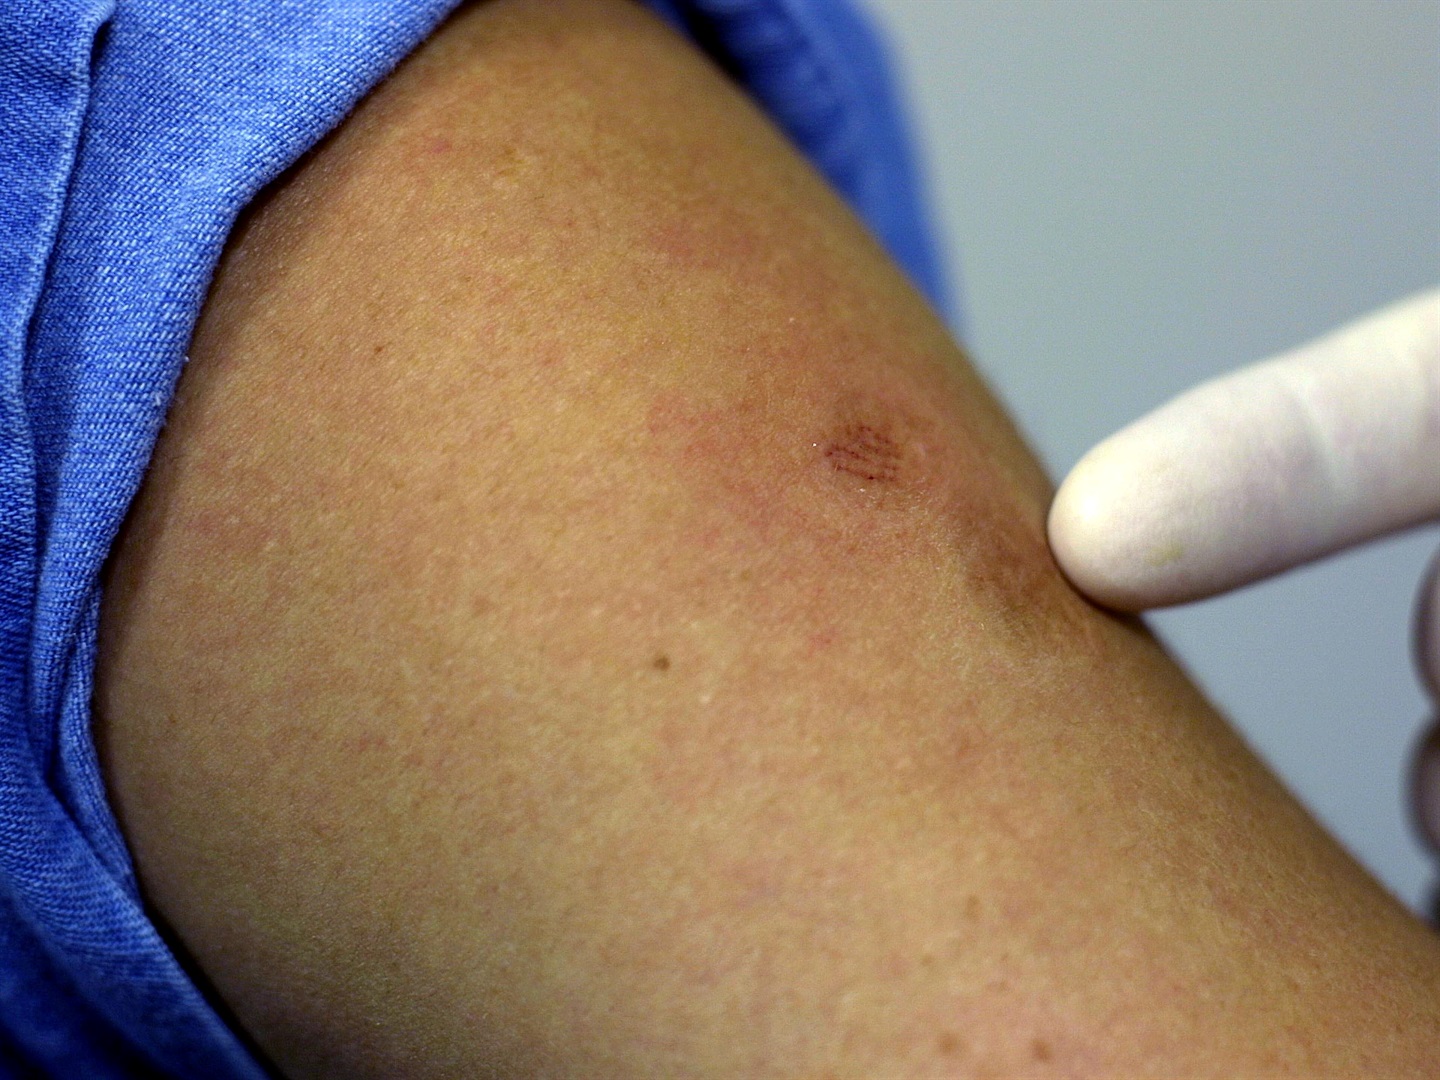 A doctor points to a patient's scars from a smallpox vaccination on December 16, 2002 in Florida. Chris Livingston/Getty Images